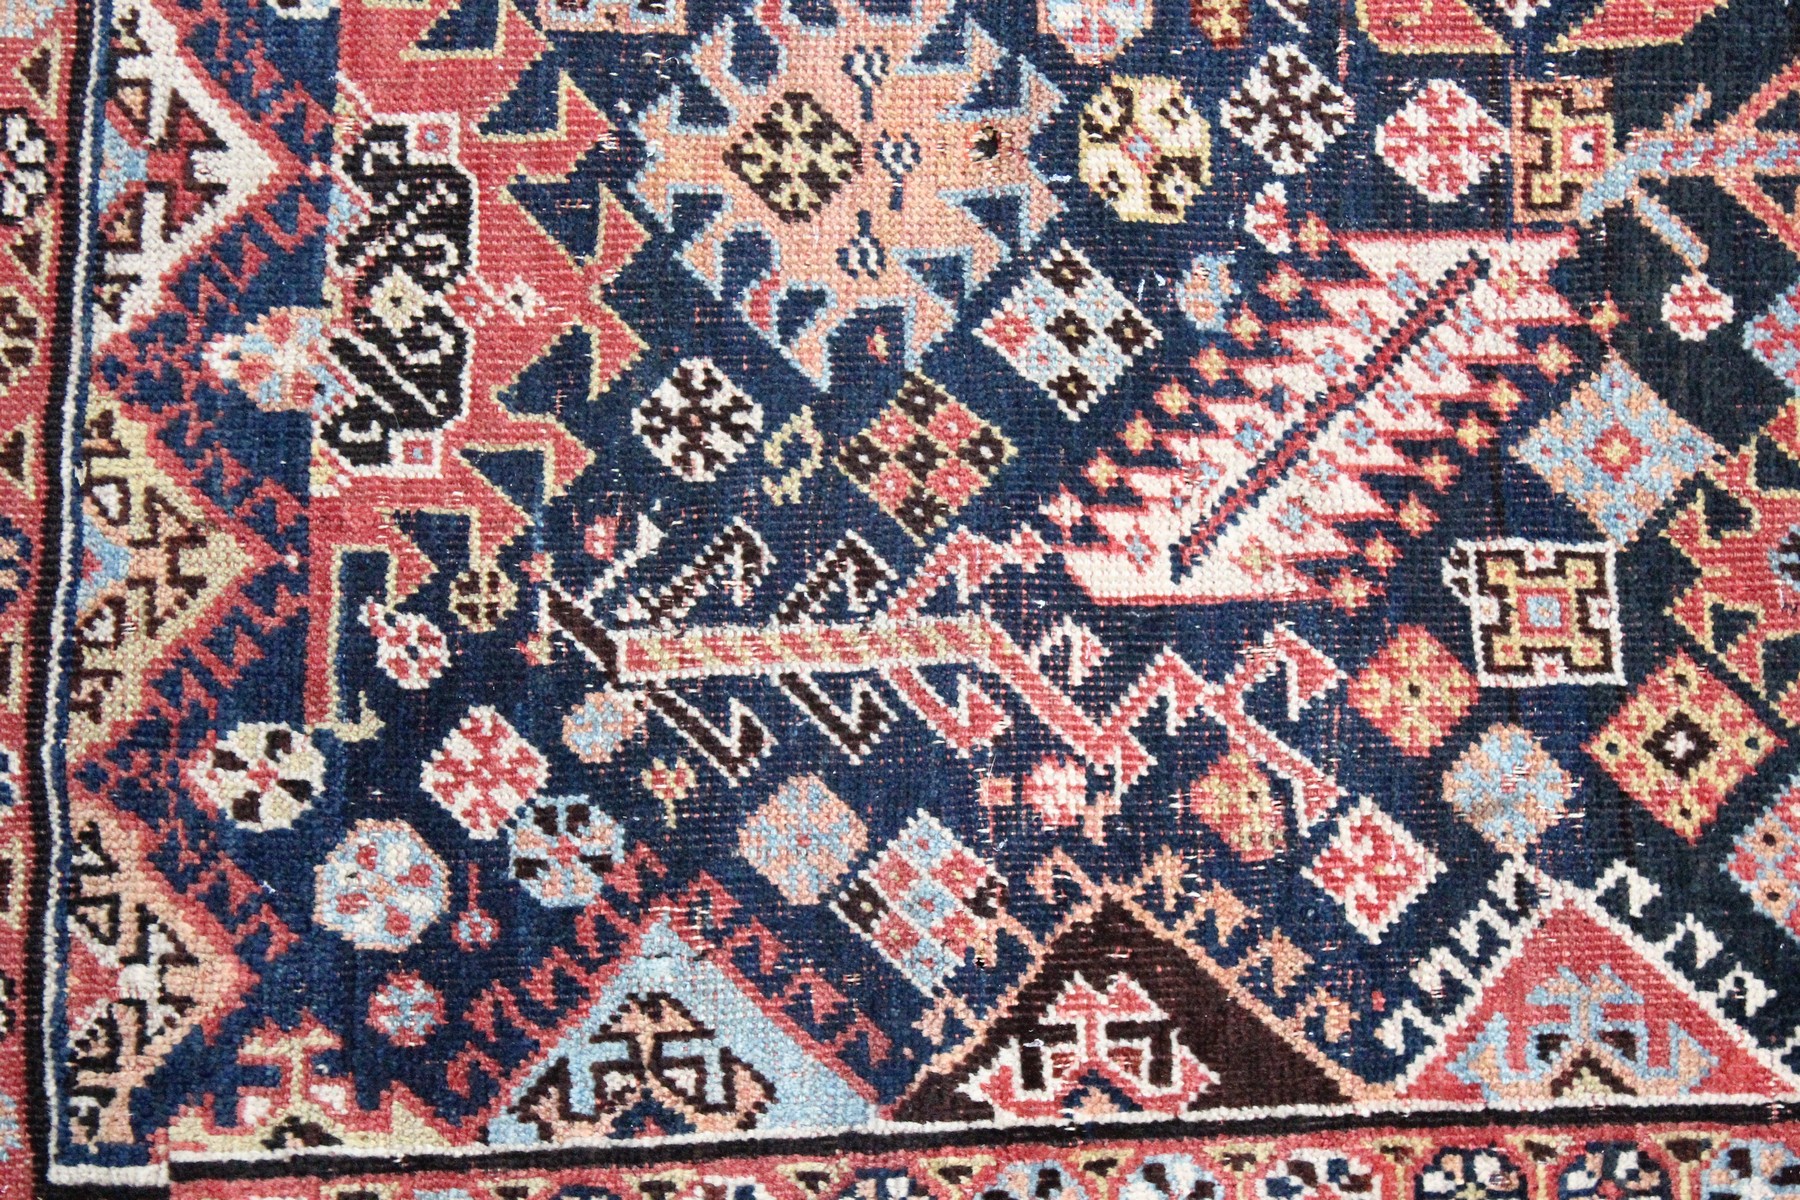 A PERSIAN QASHQAI RUG, early 20th century, dark blue ground with a central diamond shaped panel. 7ft - Image 3 of 6